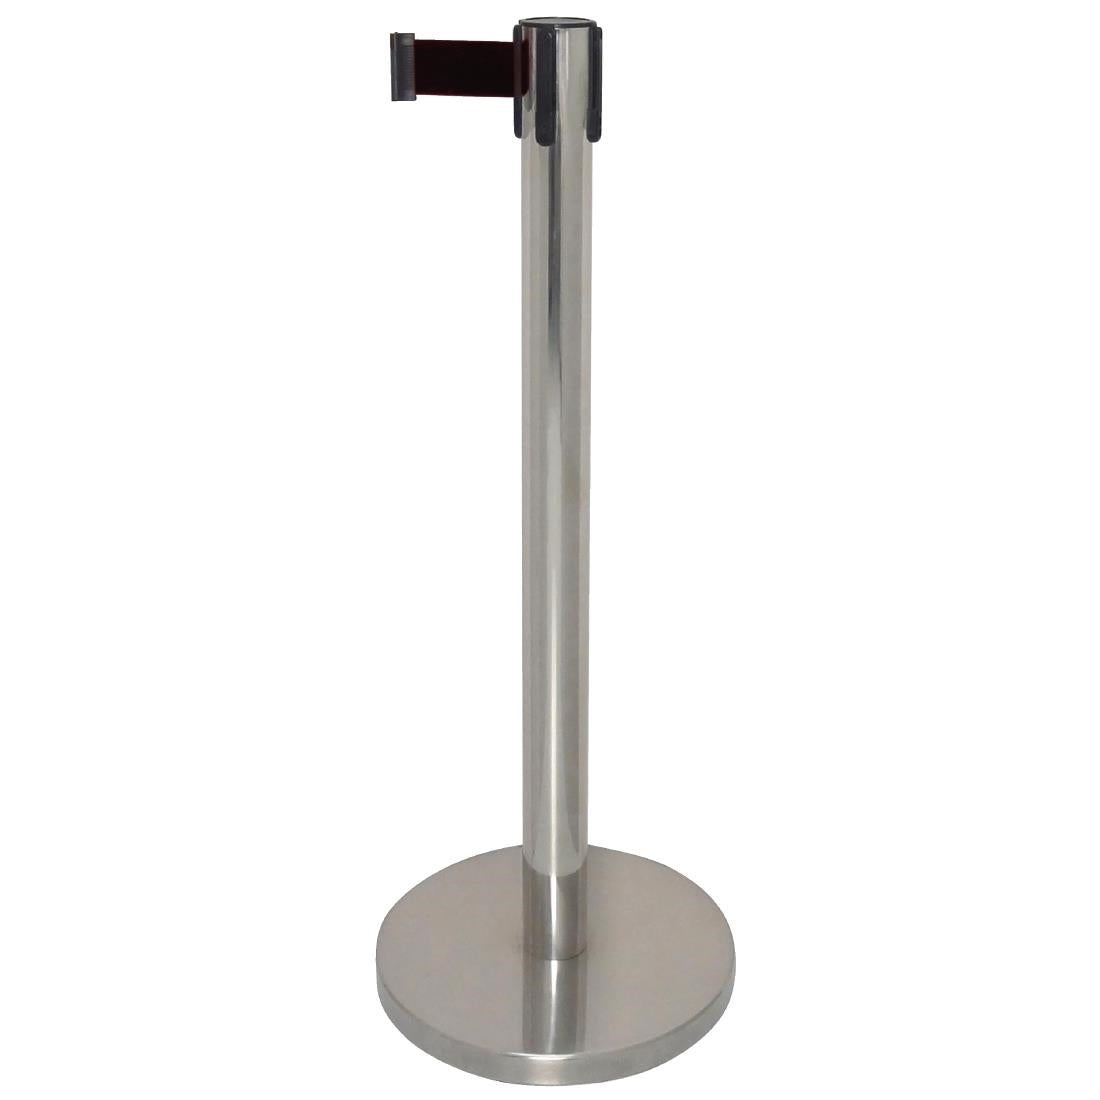 GG724 Bolero Polished Barrier with Black Strap JD Catering Equipment Solutions Ltd